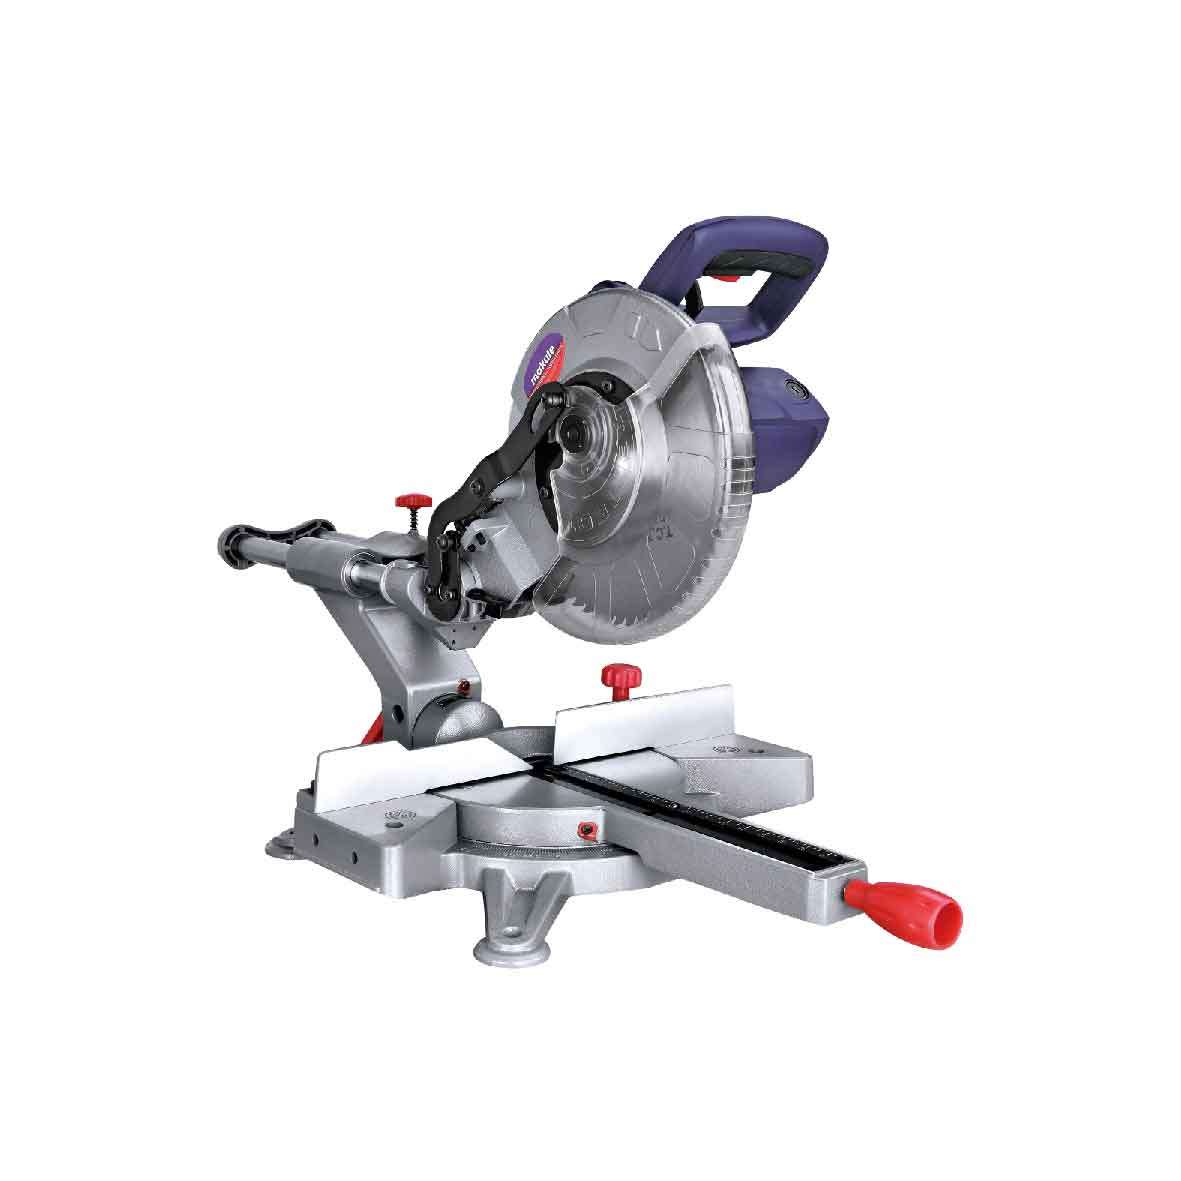 Electric Slide Compound Miter Saw